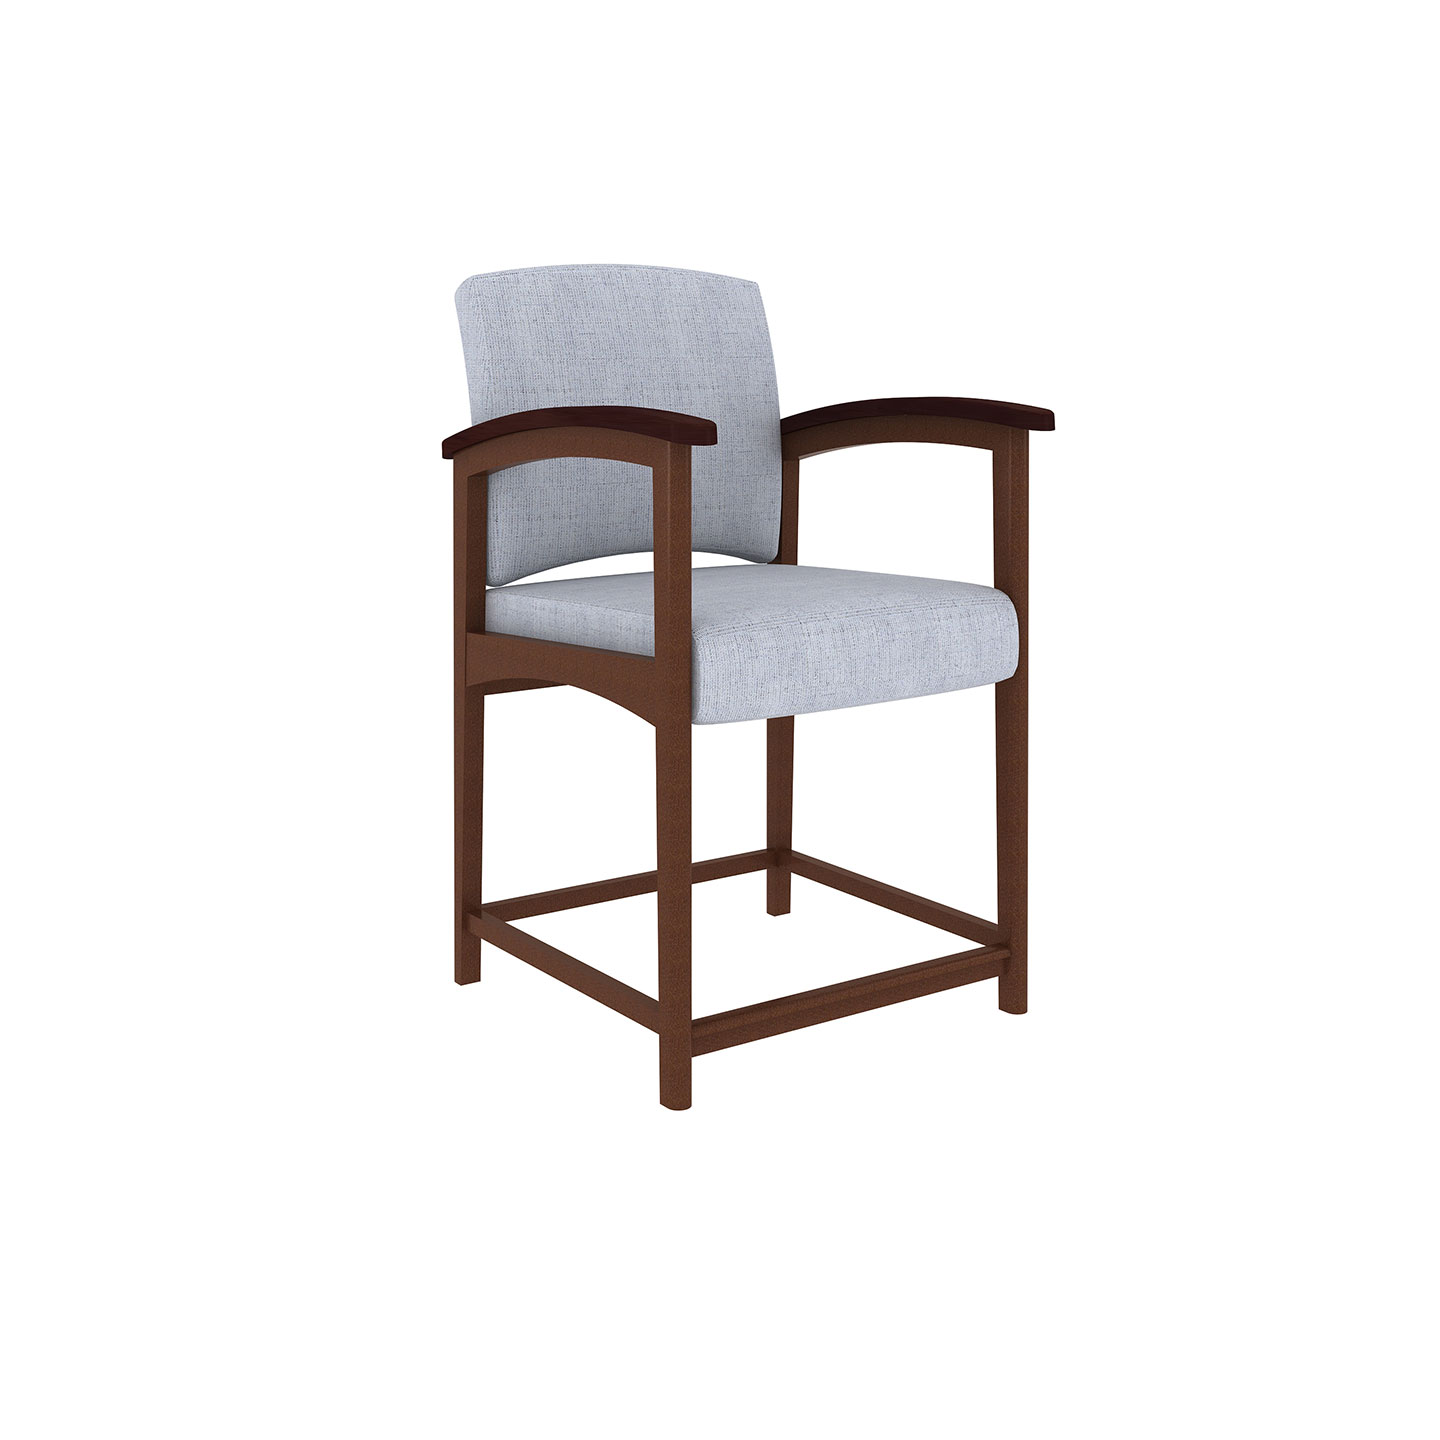 Haworth Conover hip chair in blue upholstery and dark brown wood body